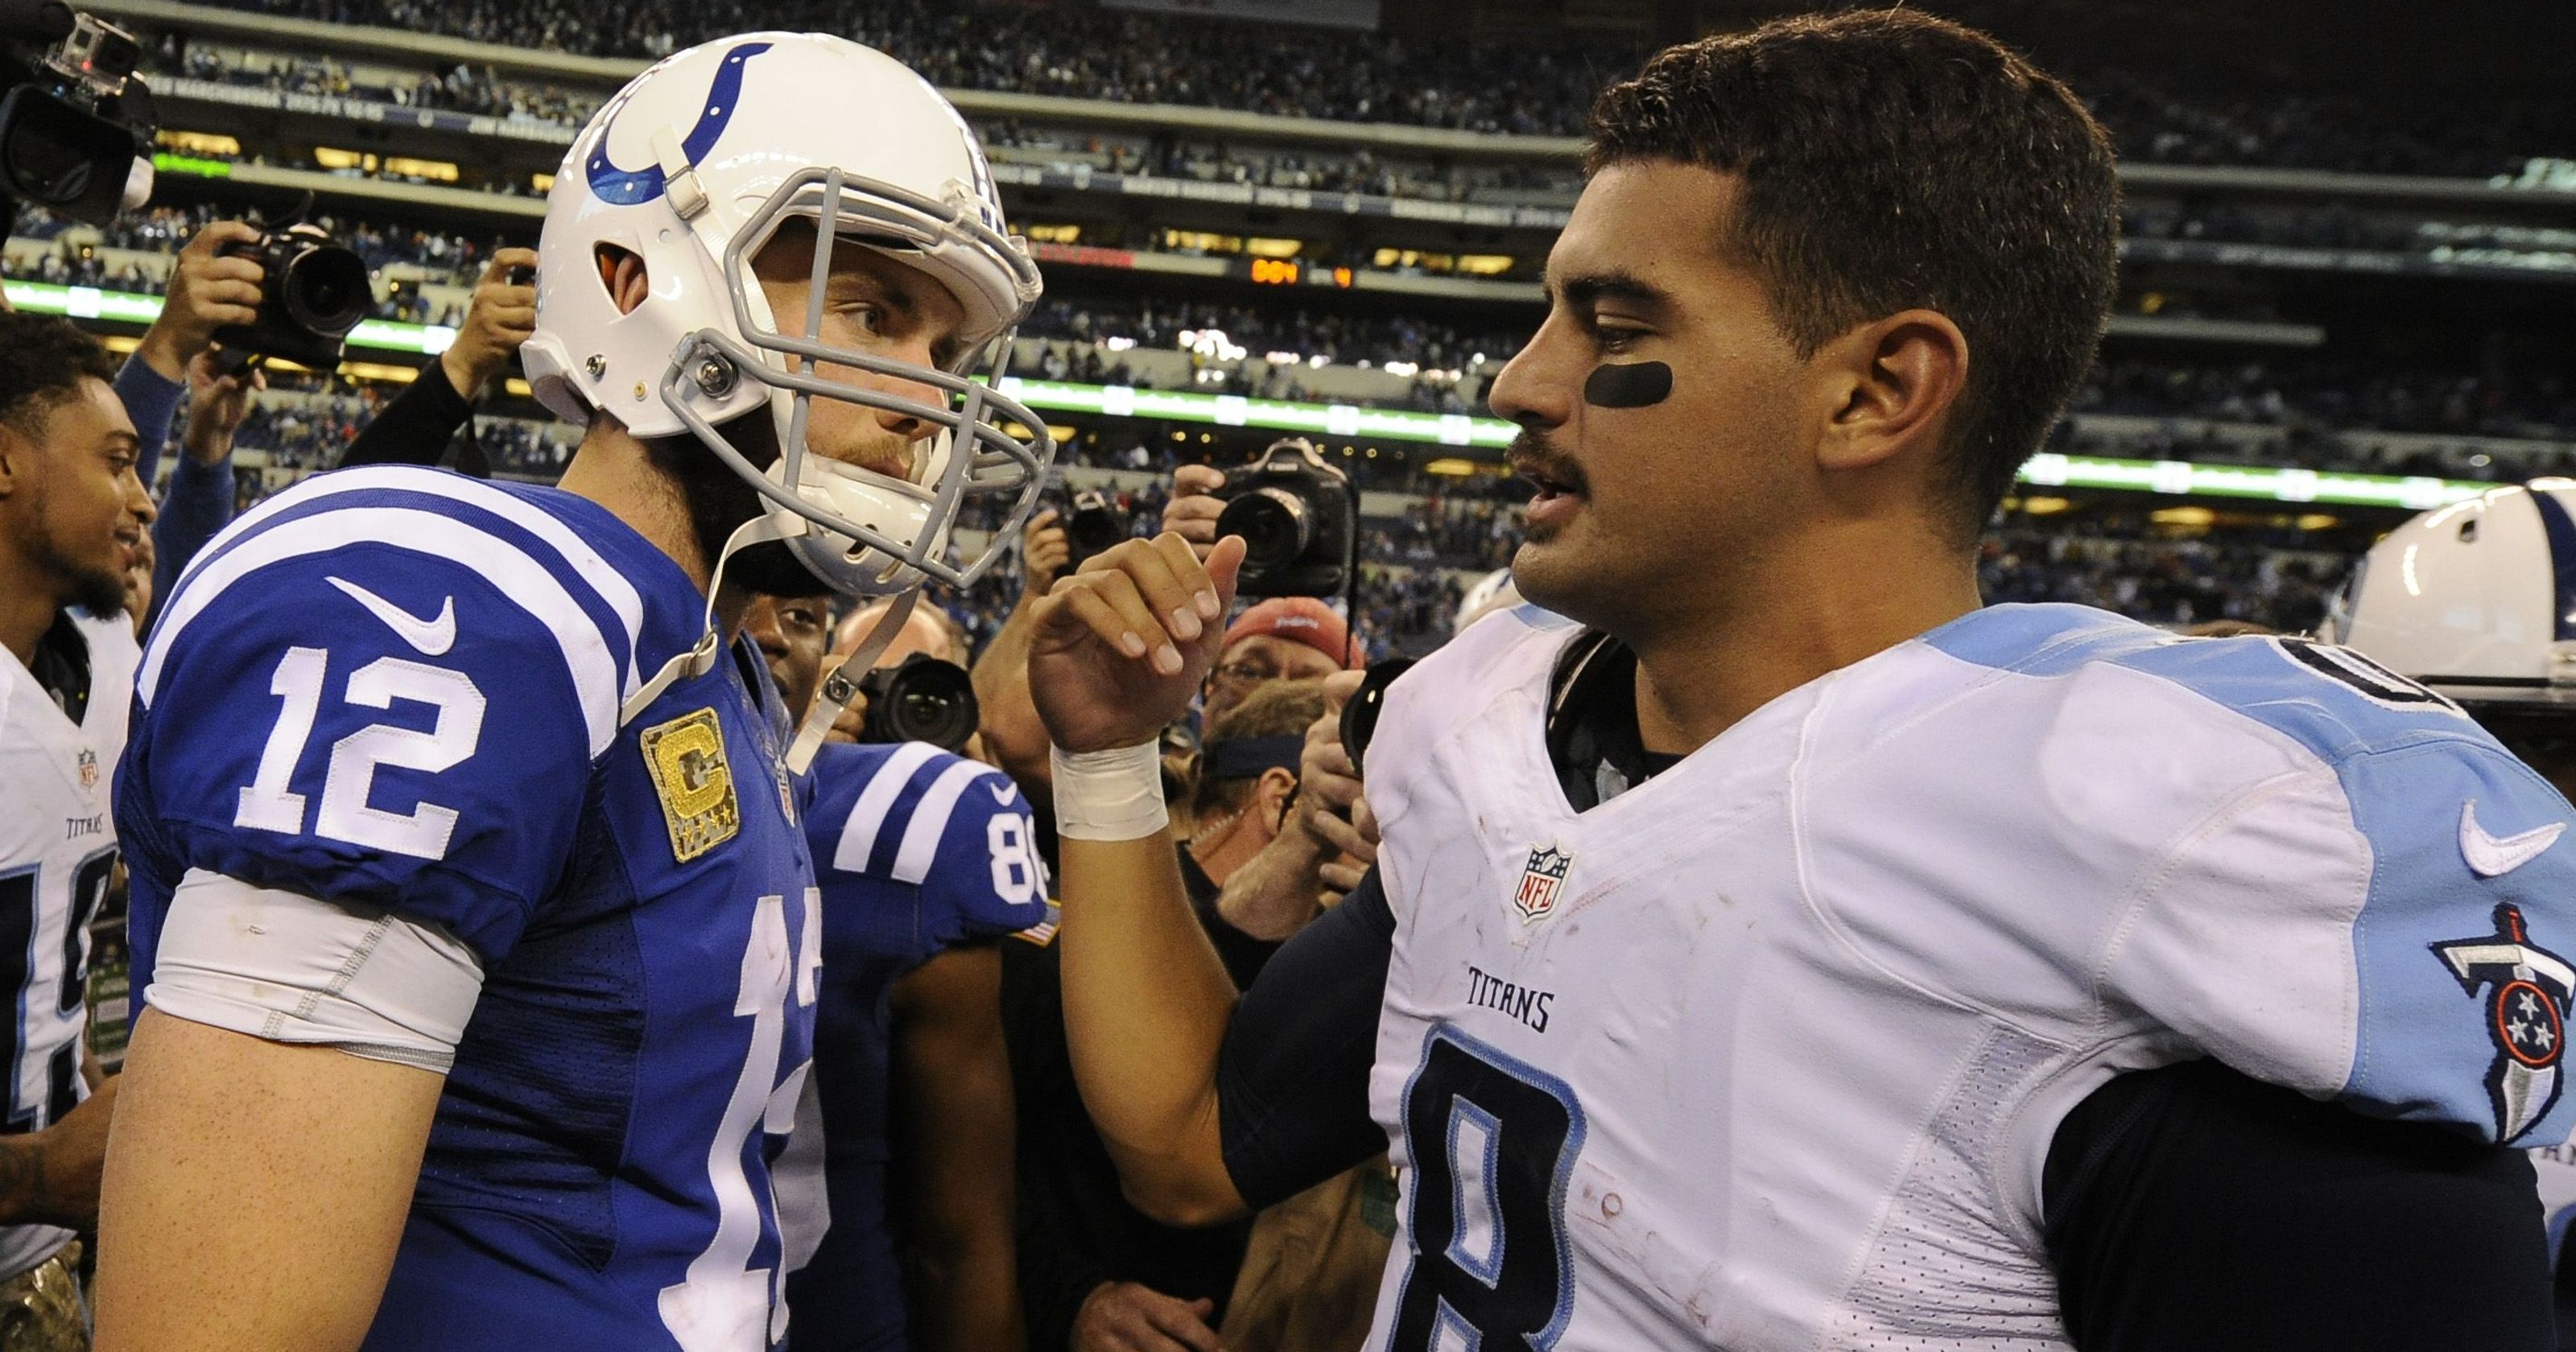 Andrew Luck and Marcus Mariota